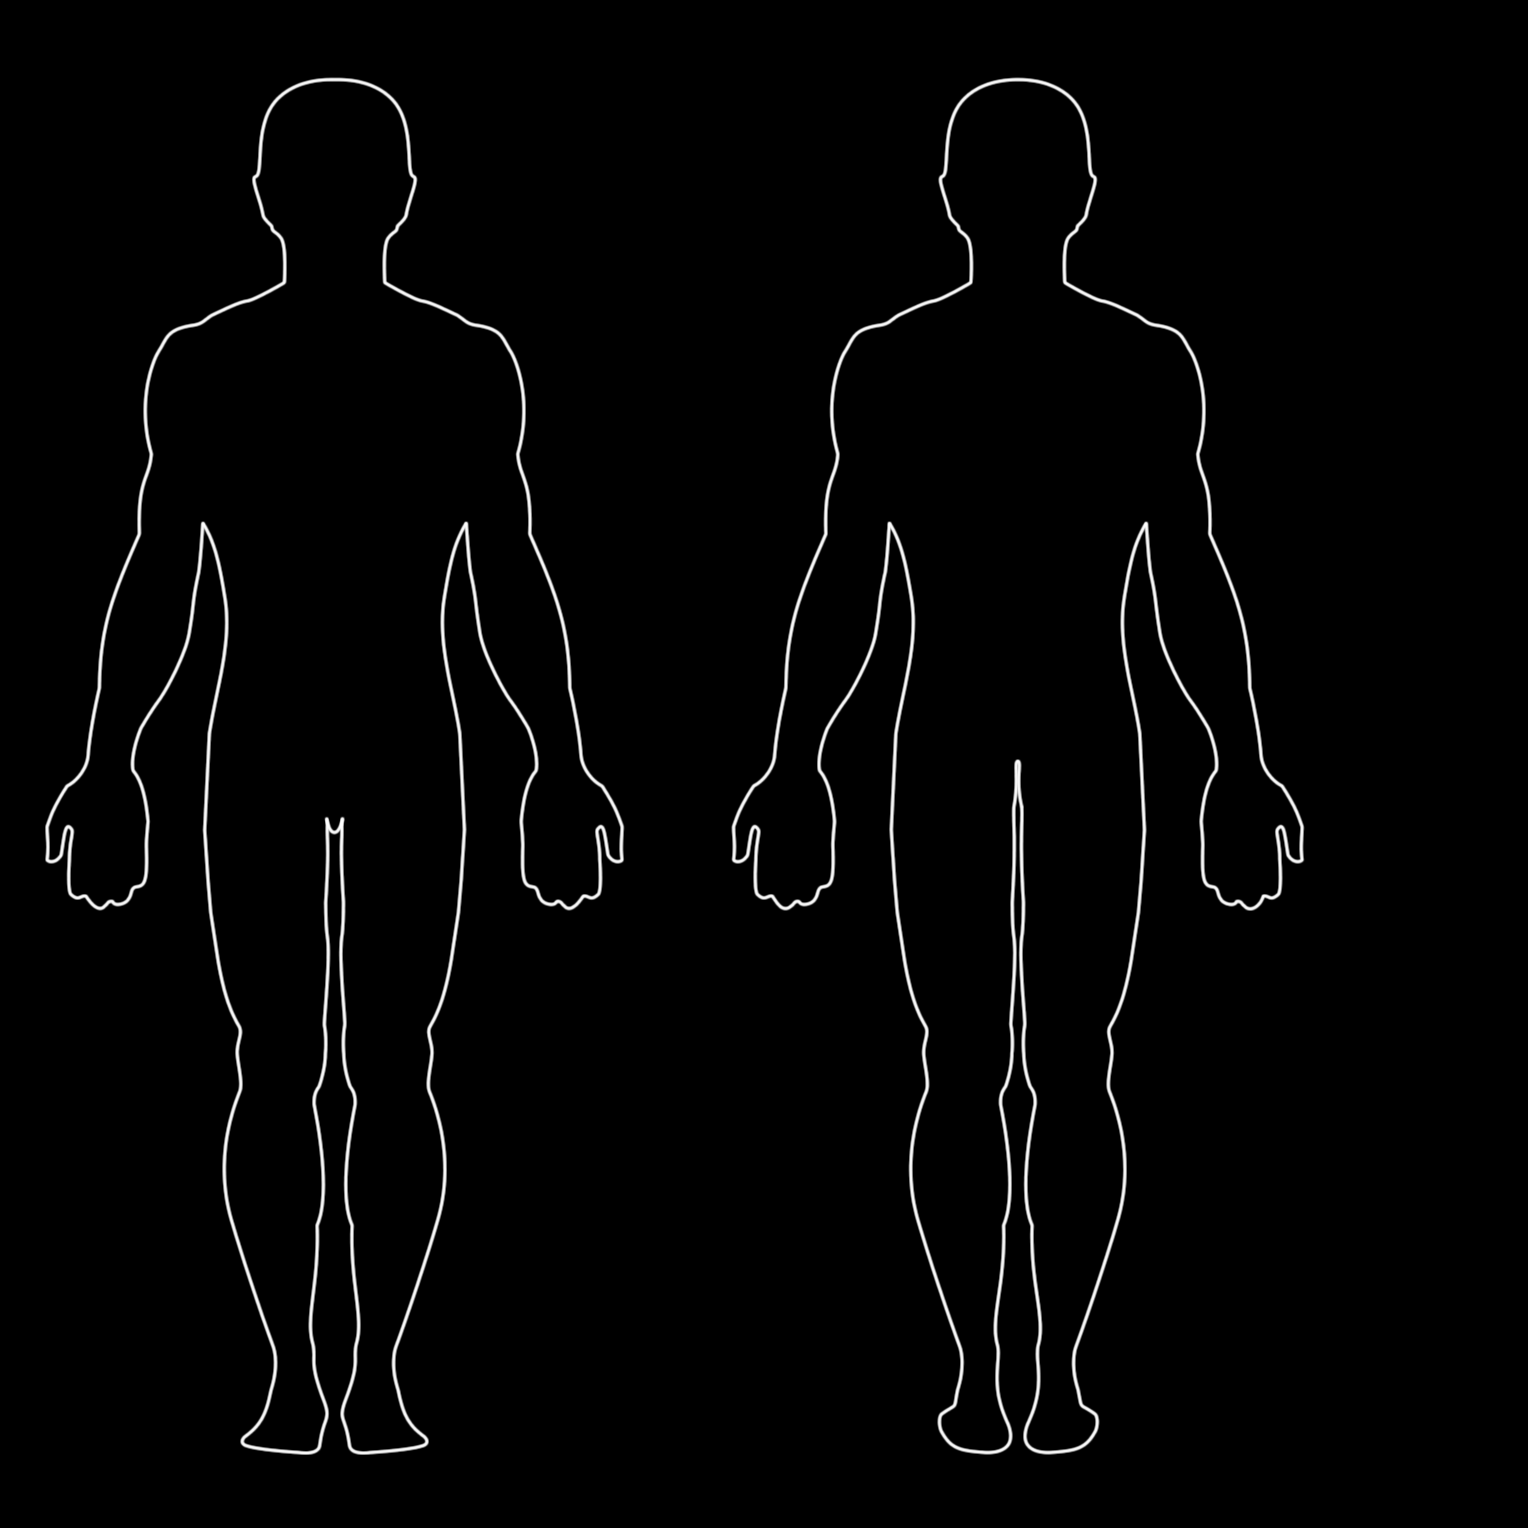 File:Outline-body.png - PNG H